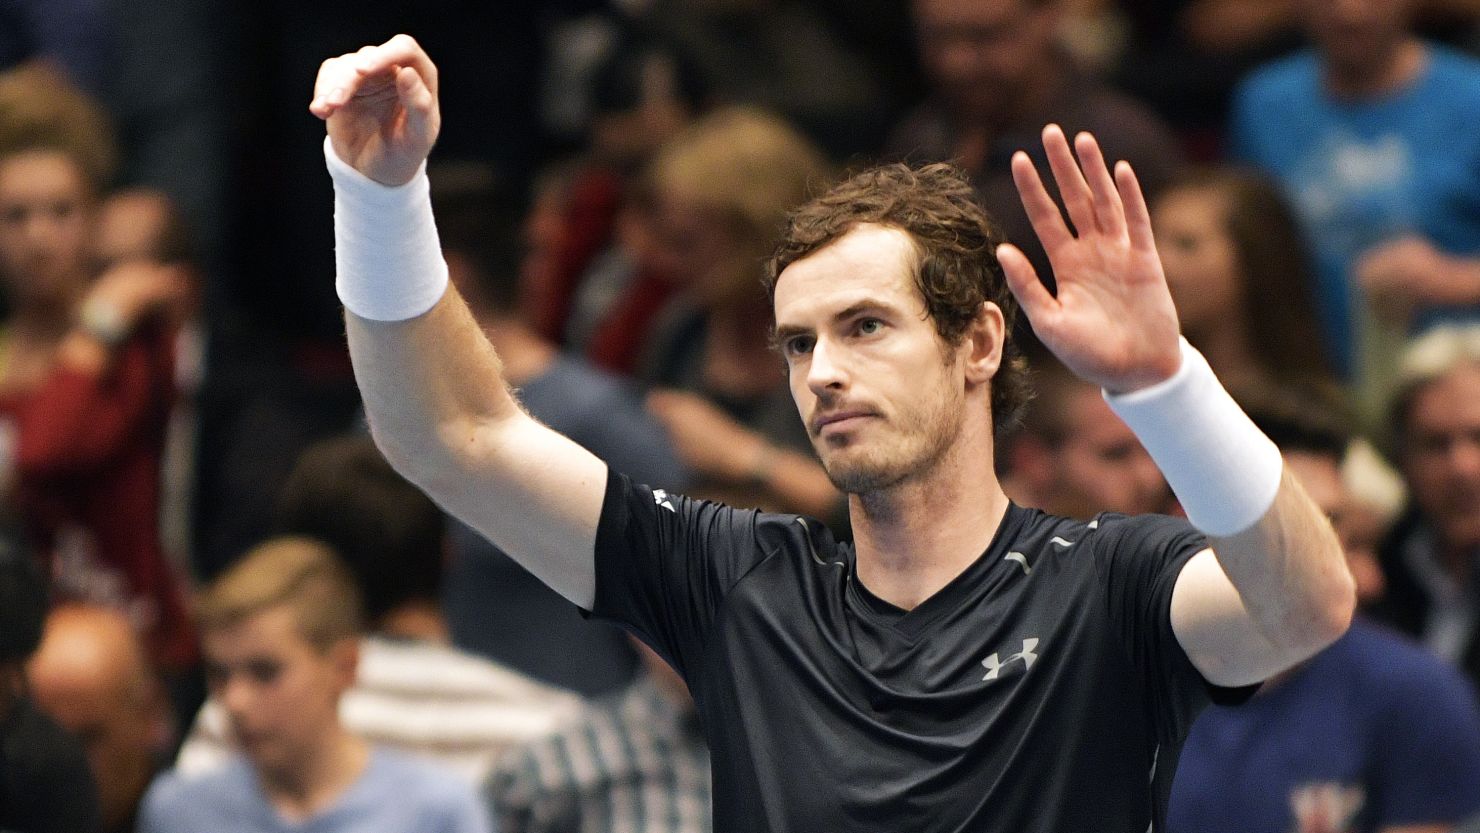 Andy Murray triumphs in the Vienna Open event as he beats Jo-Wilfried Tsonga in the final.